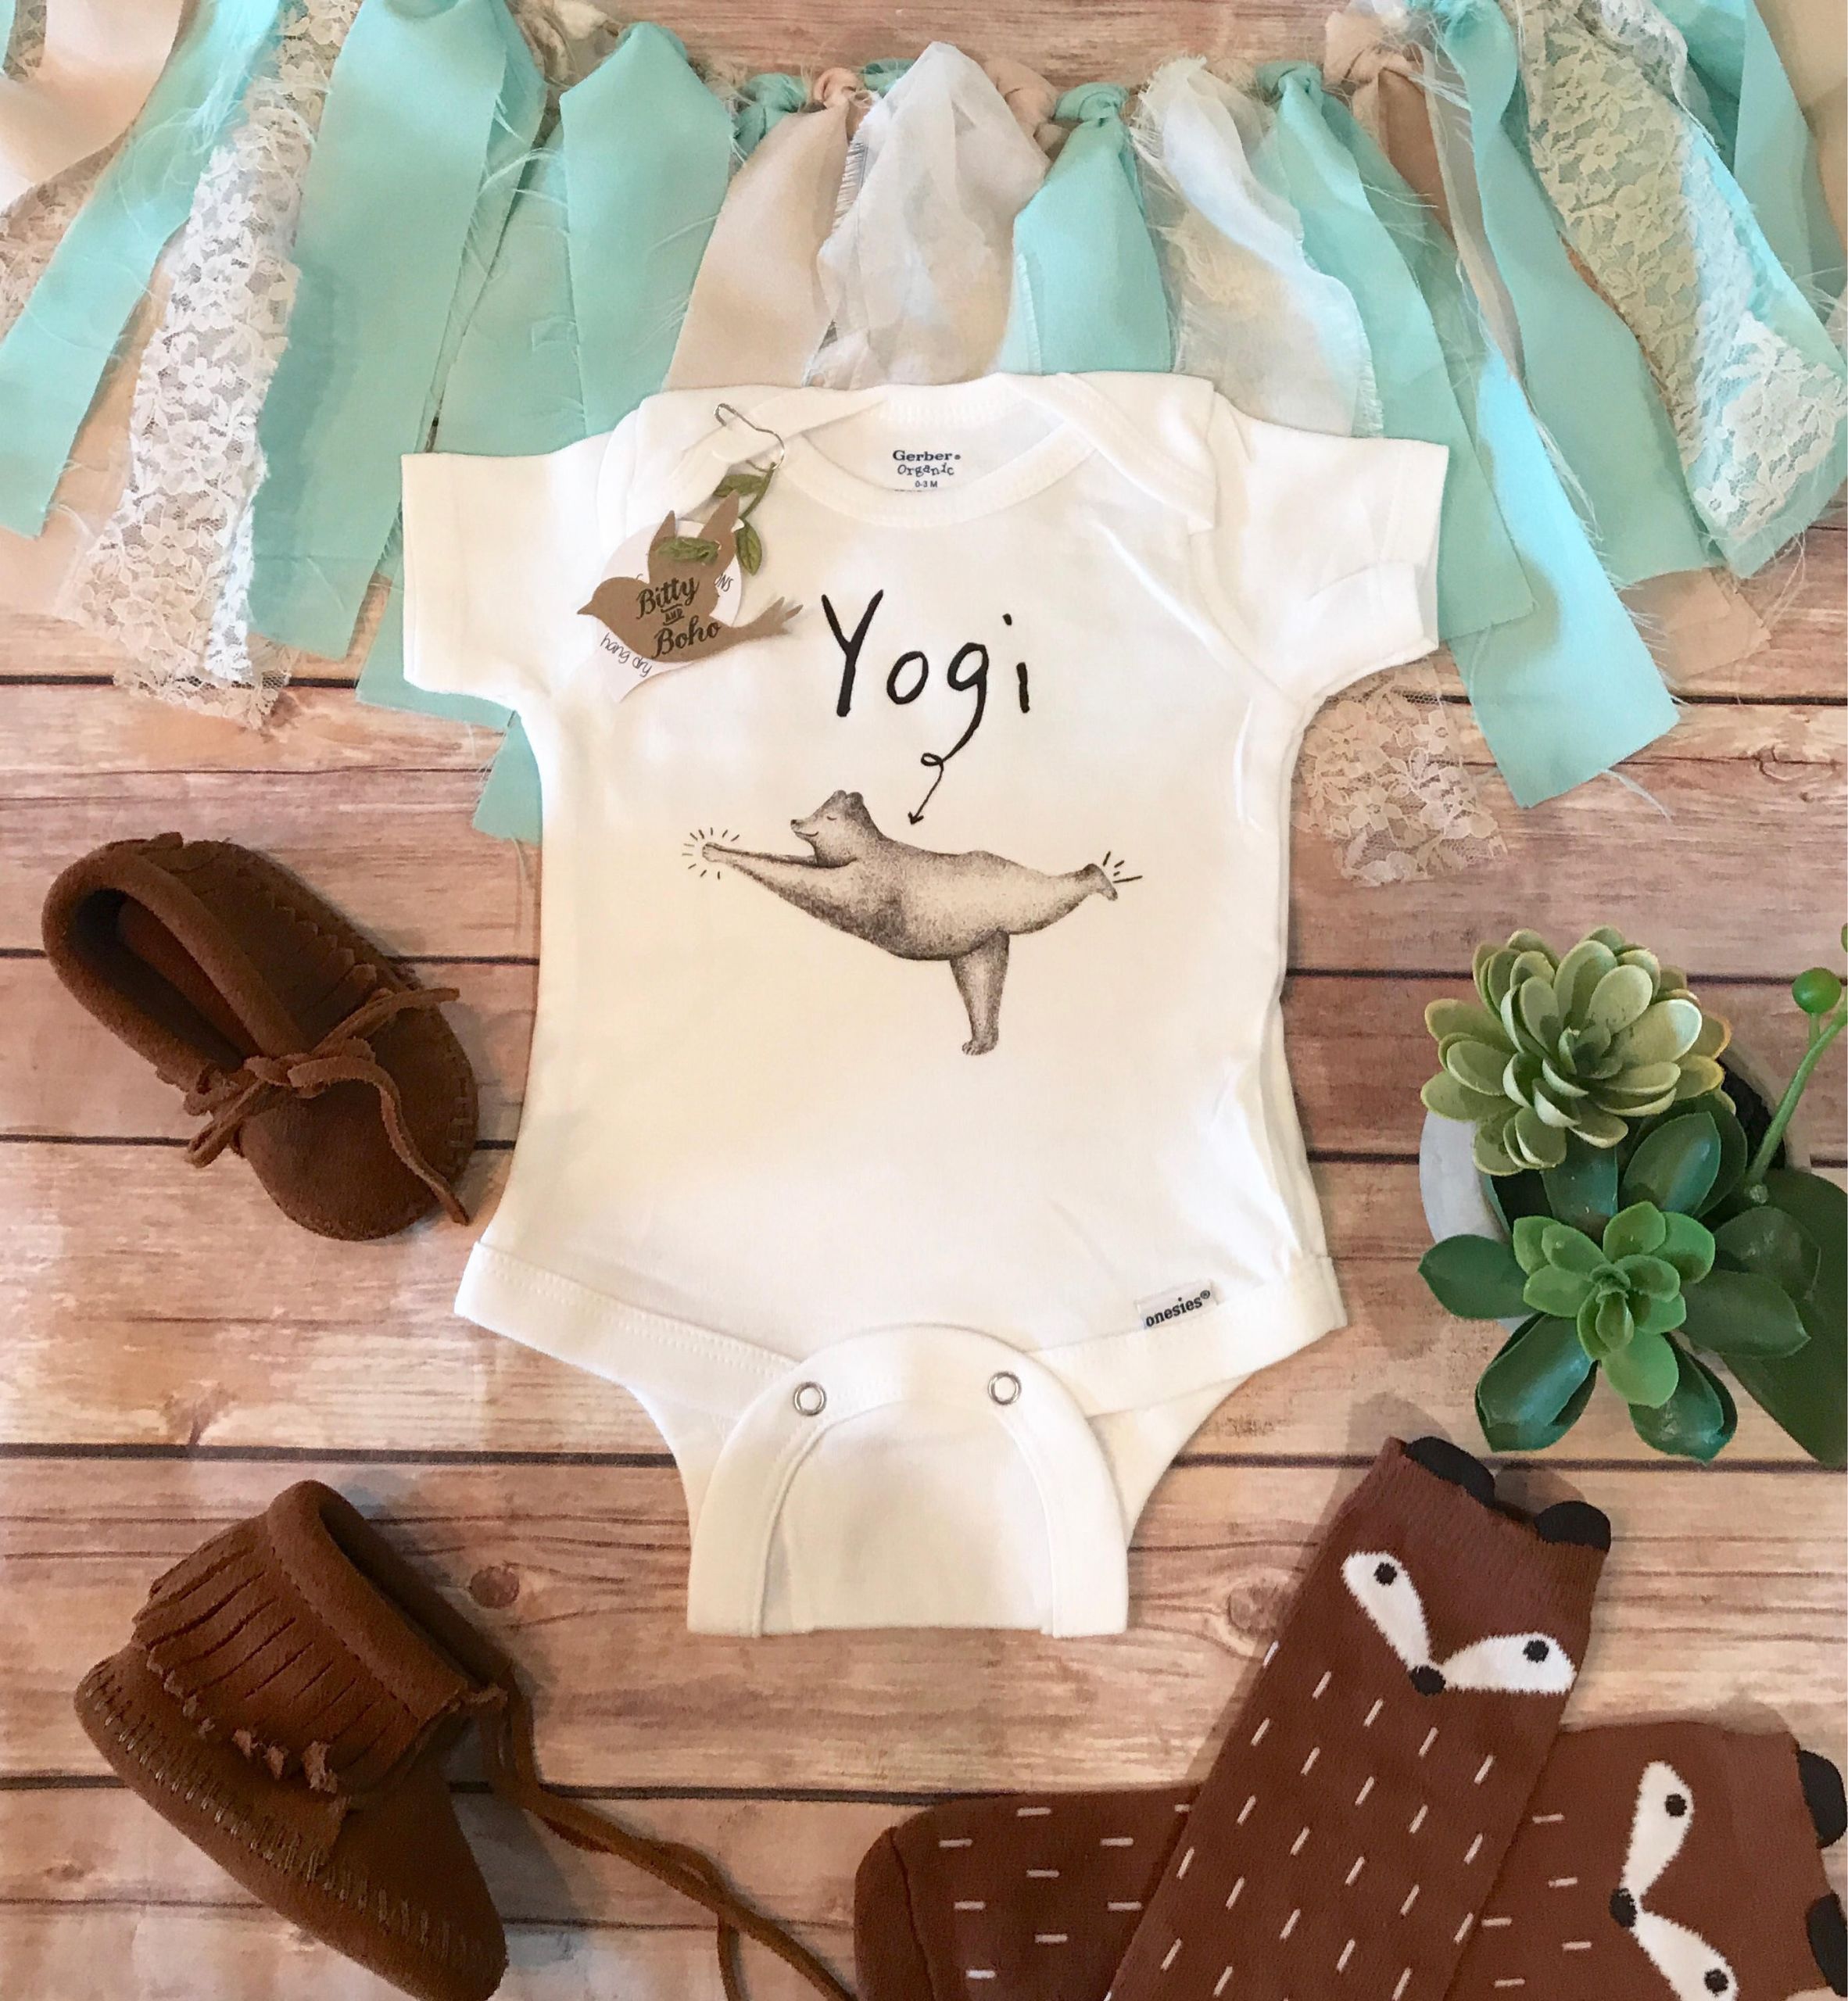 Yoga Baby Gifts
 Bear esie Hipster Baby Clothes Yoga Baby Bear Yoga